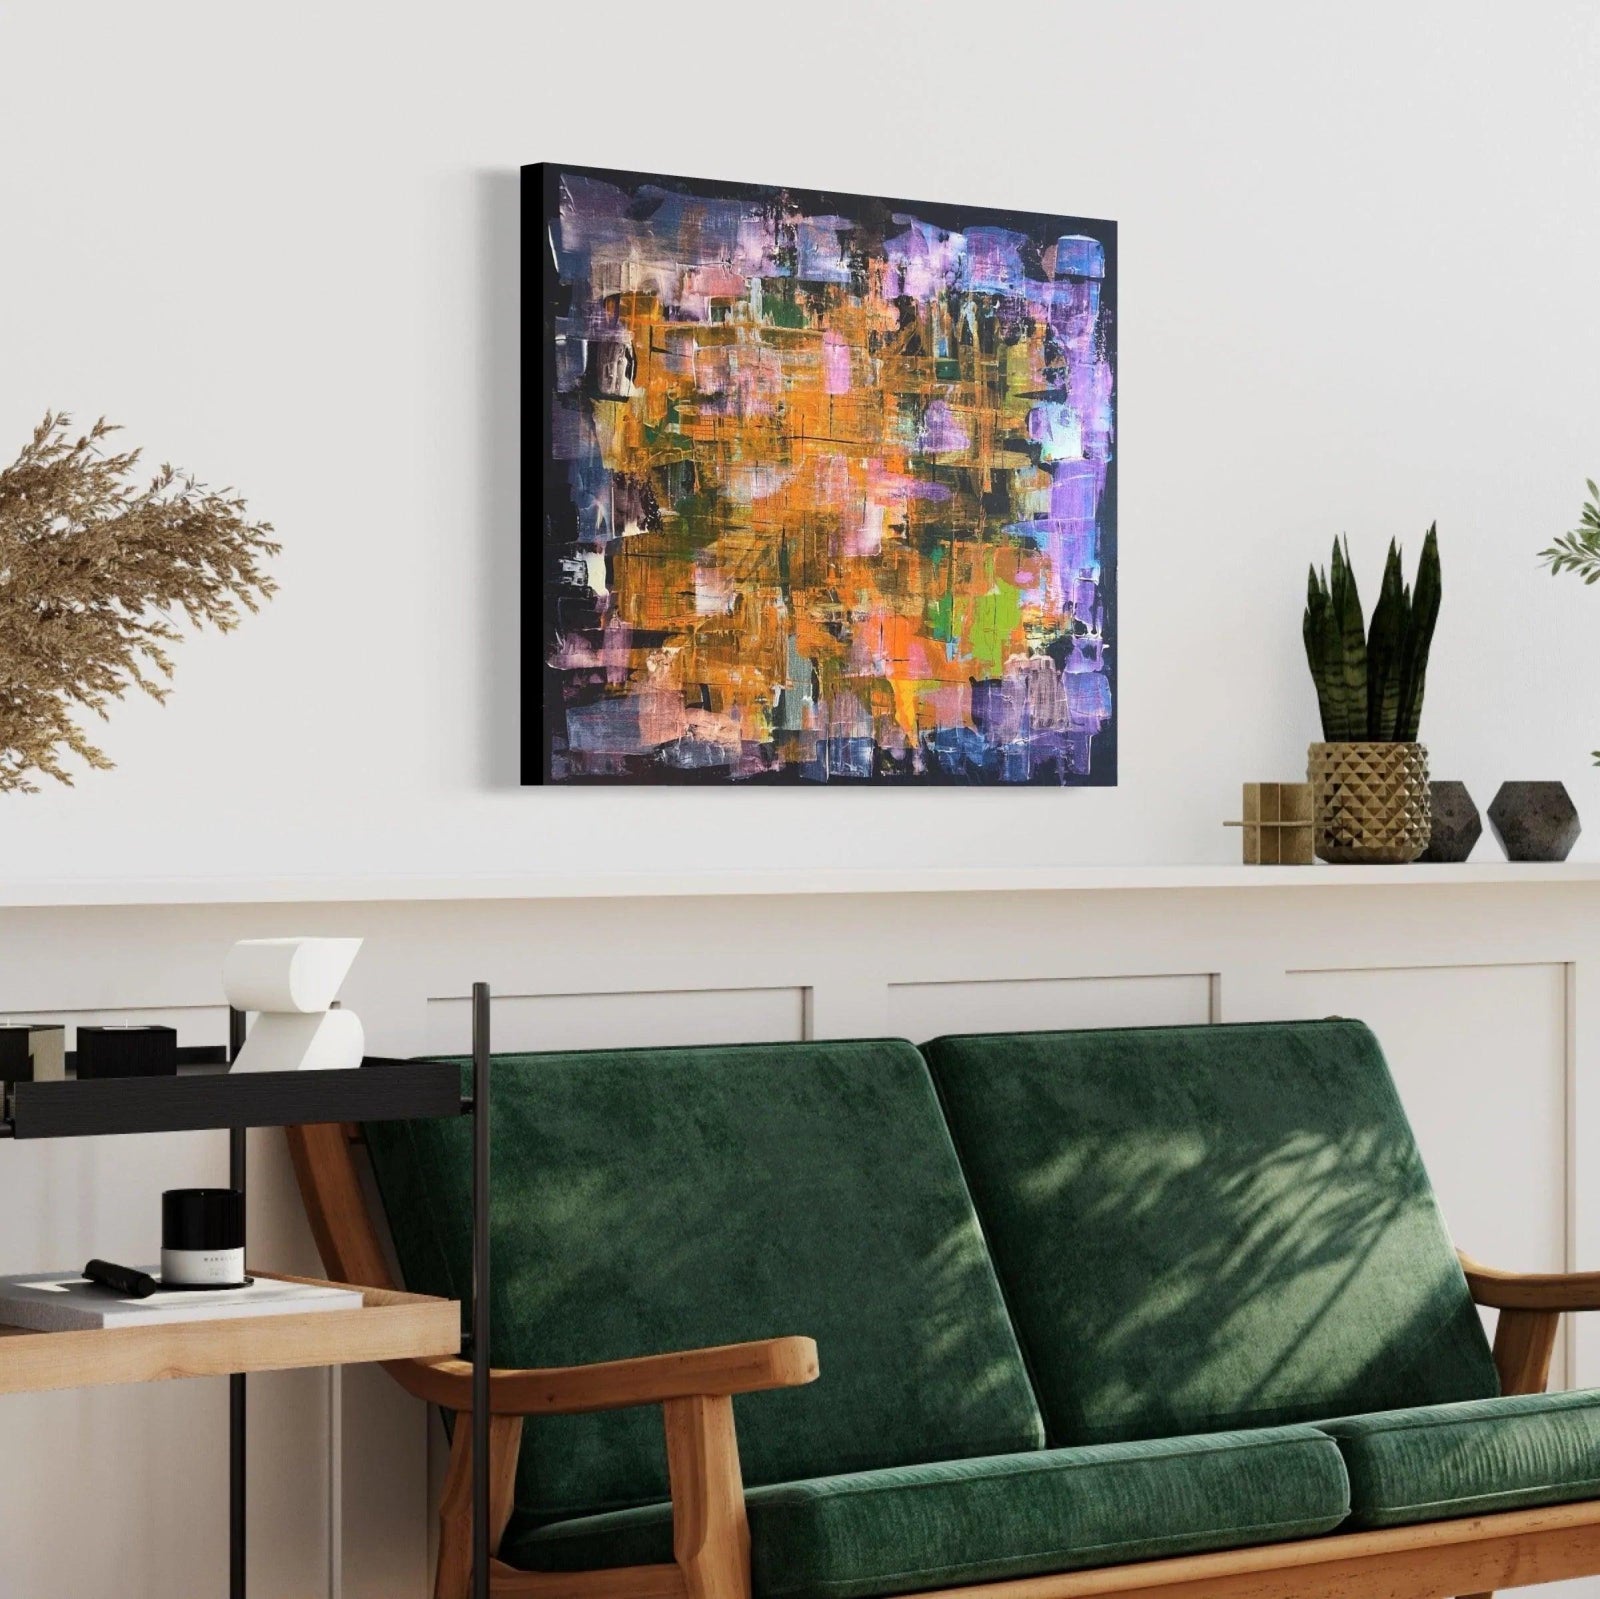 Never Enough Part ii Original Abstract Painting-Original Paintings-Abstract & Impressionistic Art Gallery-Paintings, Prints, Homeware, Art Gifts From Scotland By Scottish Artist Kevin Hunter